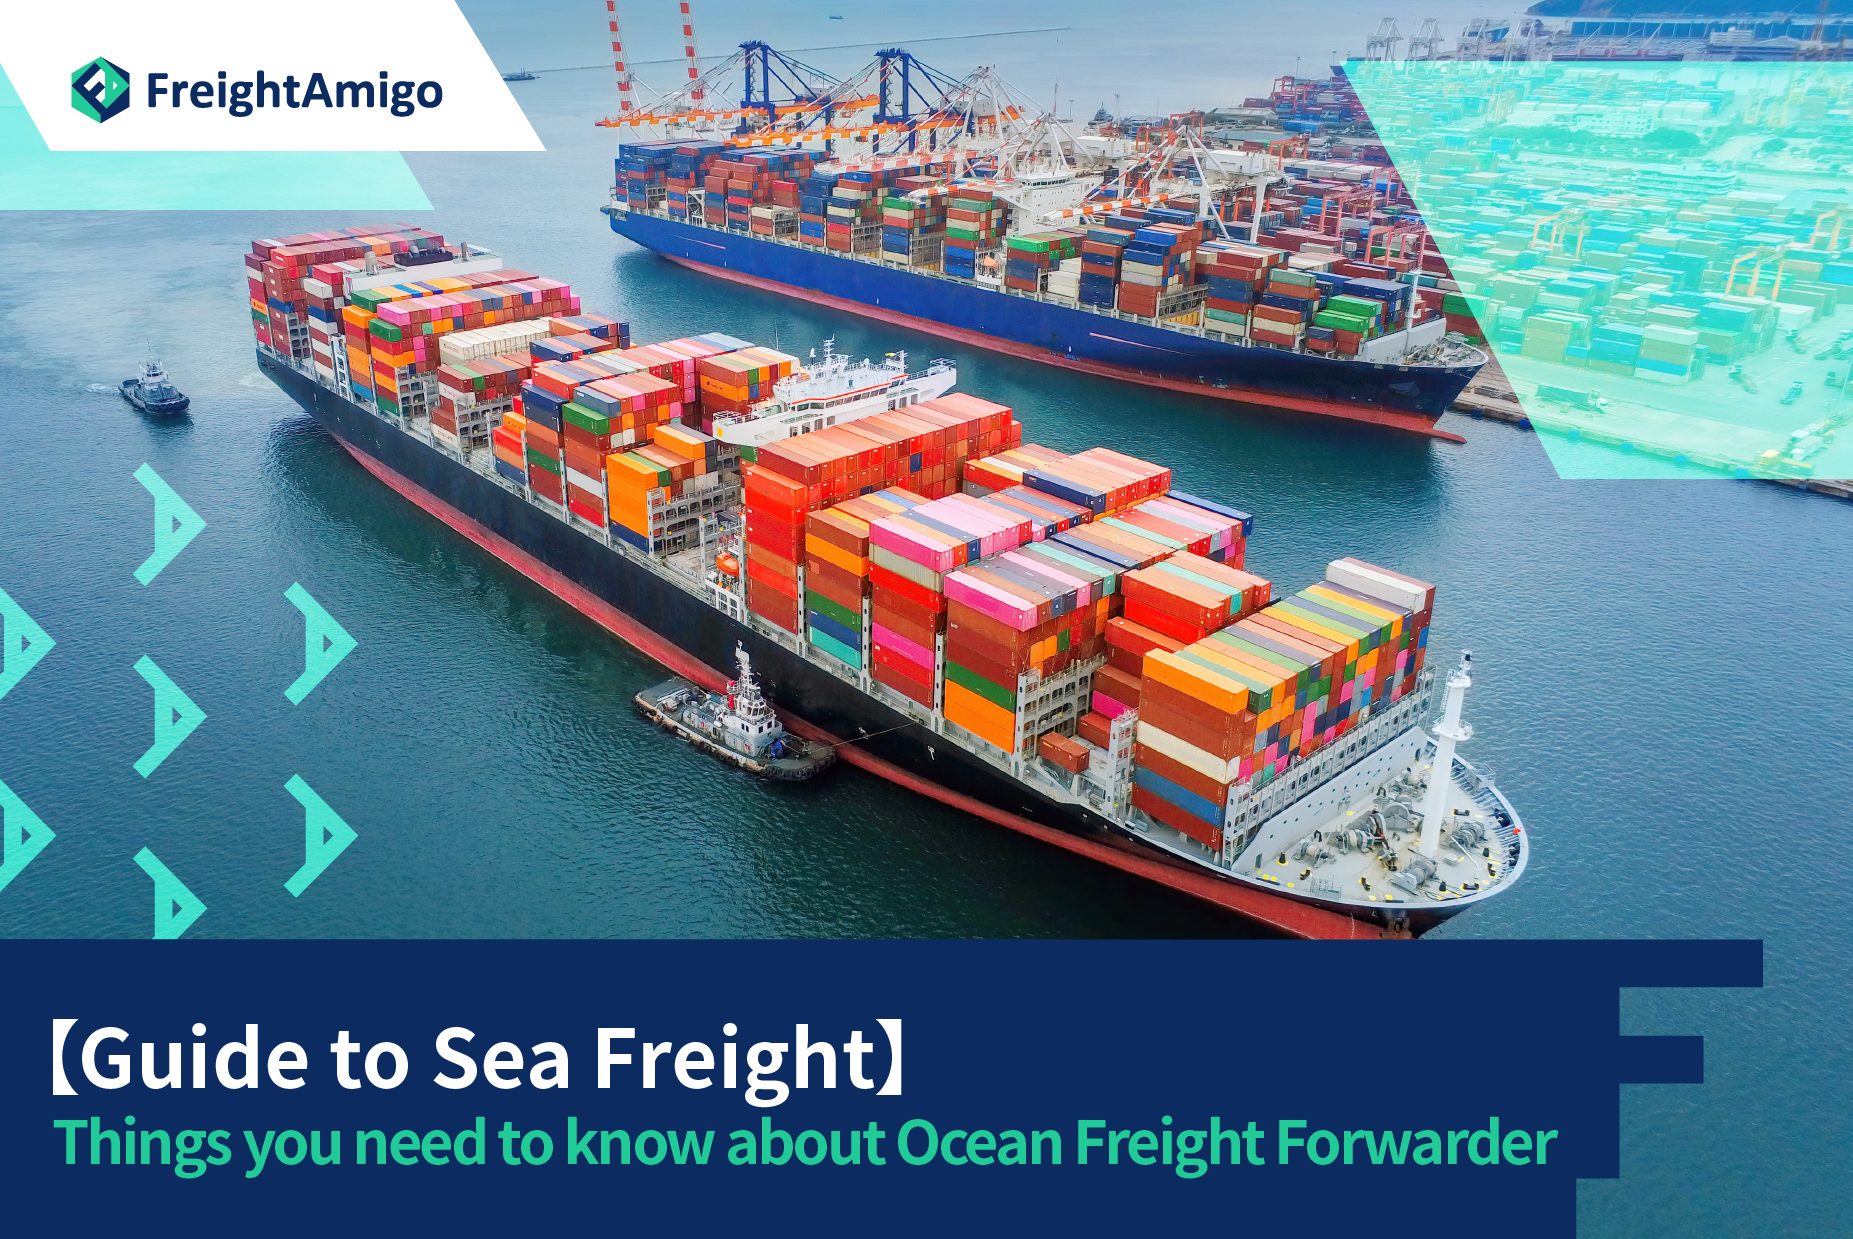 【Guide to Sea Freight】 | Thing you need to know about Ocean Freight Forwarder